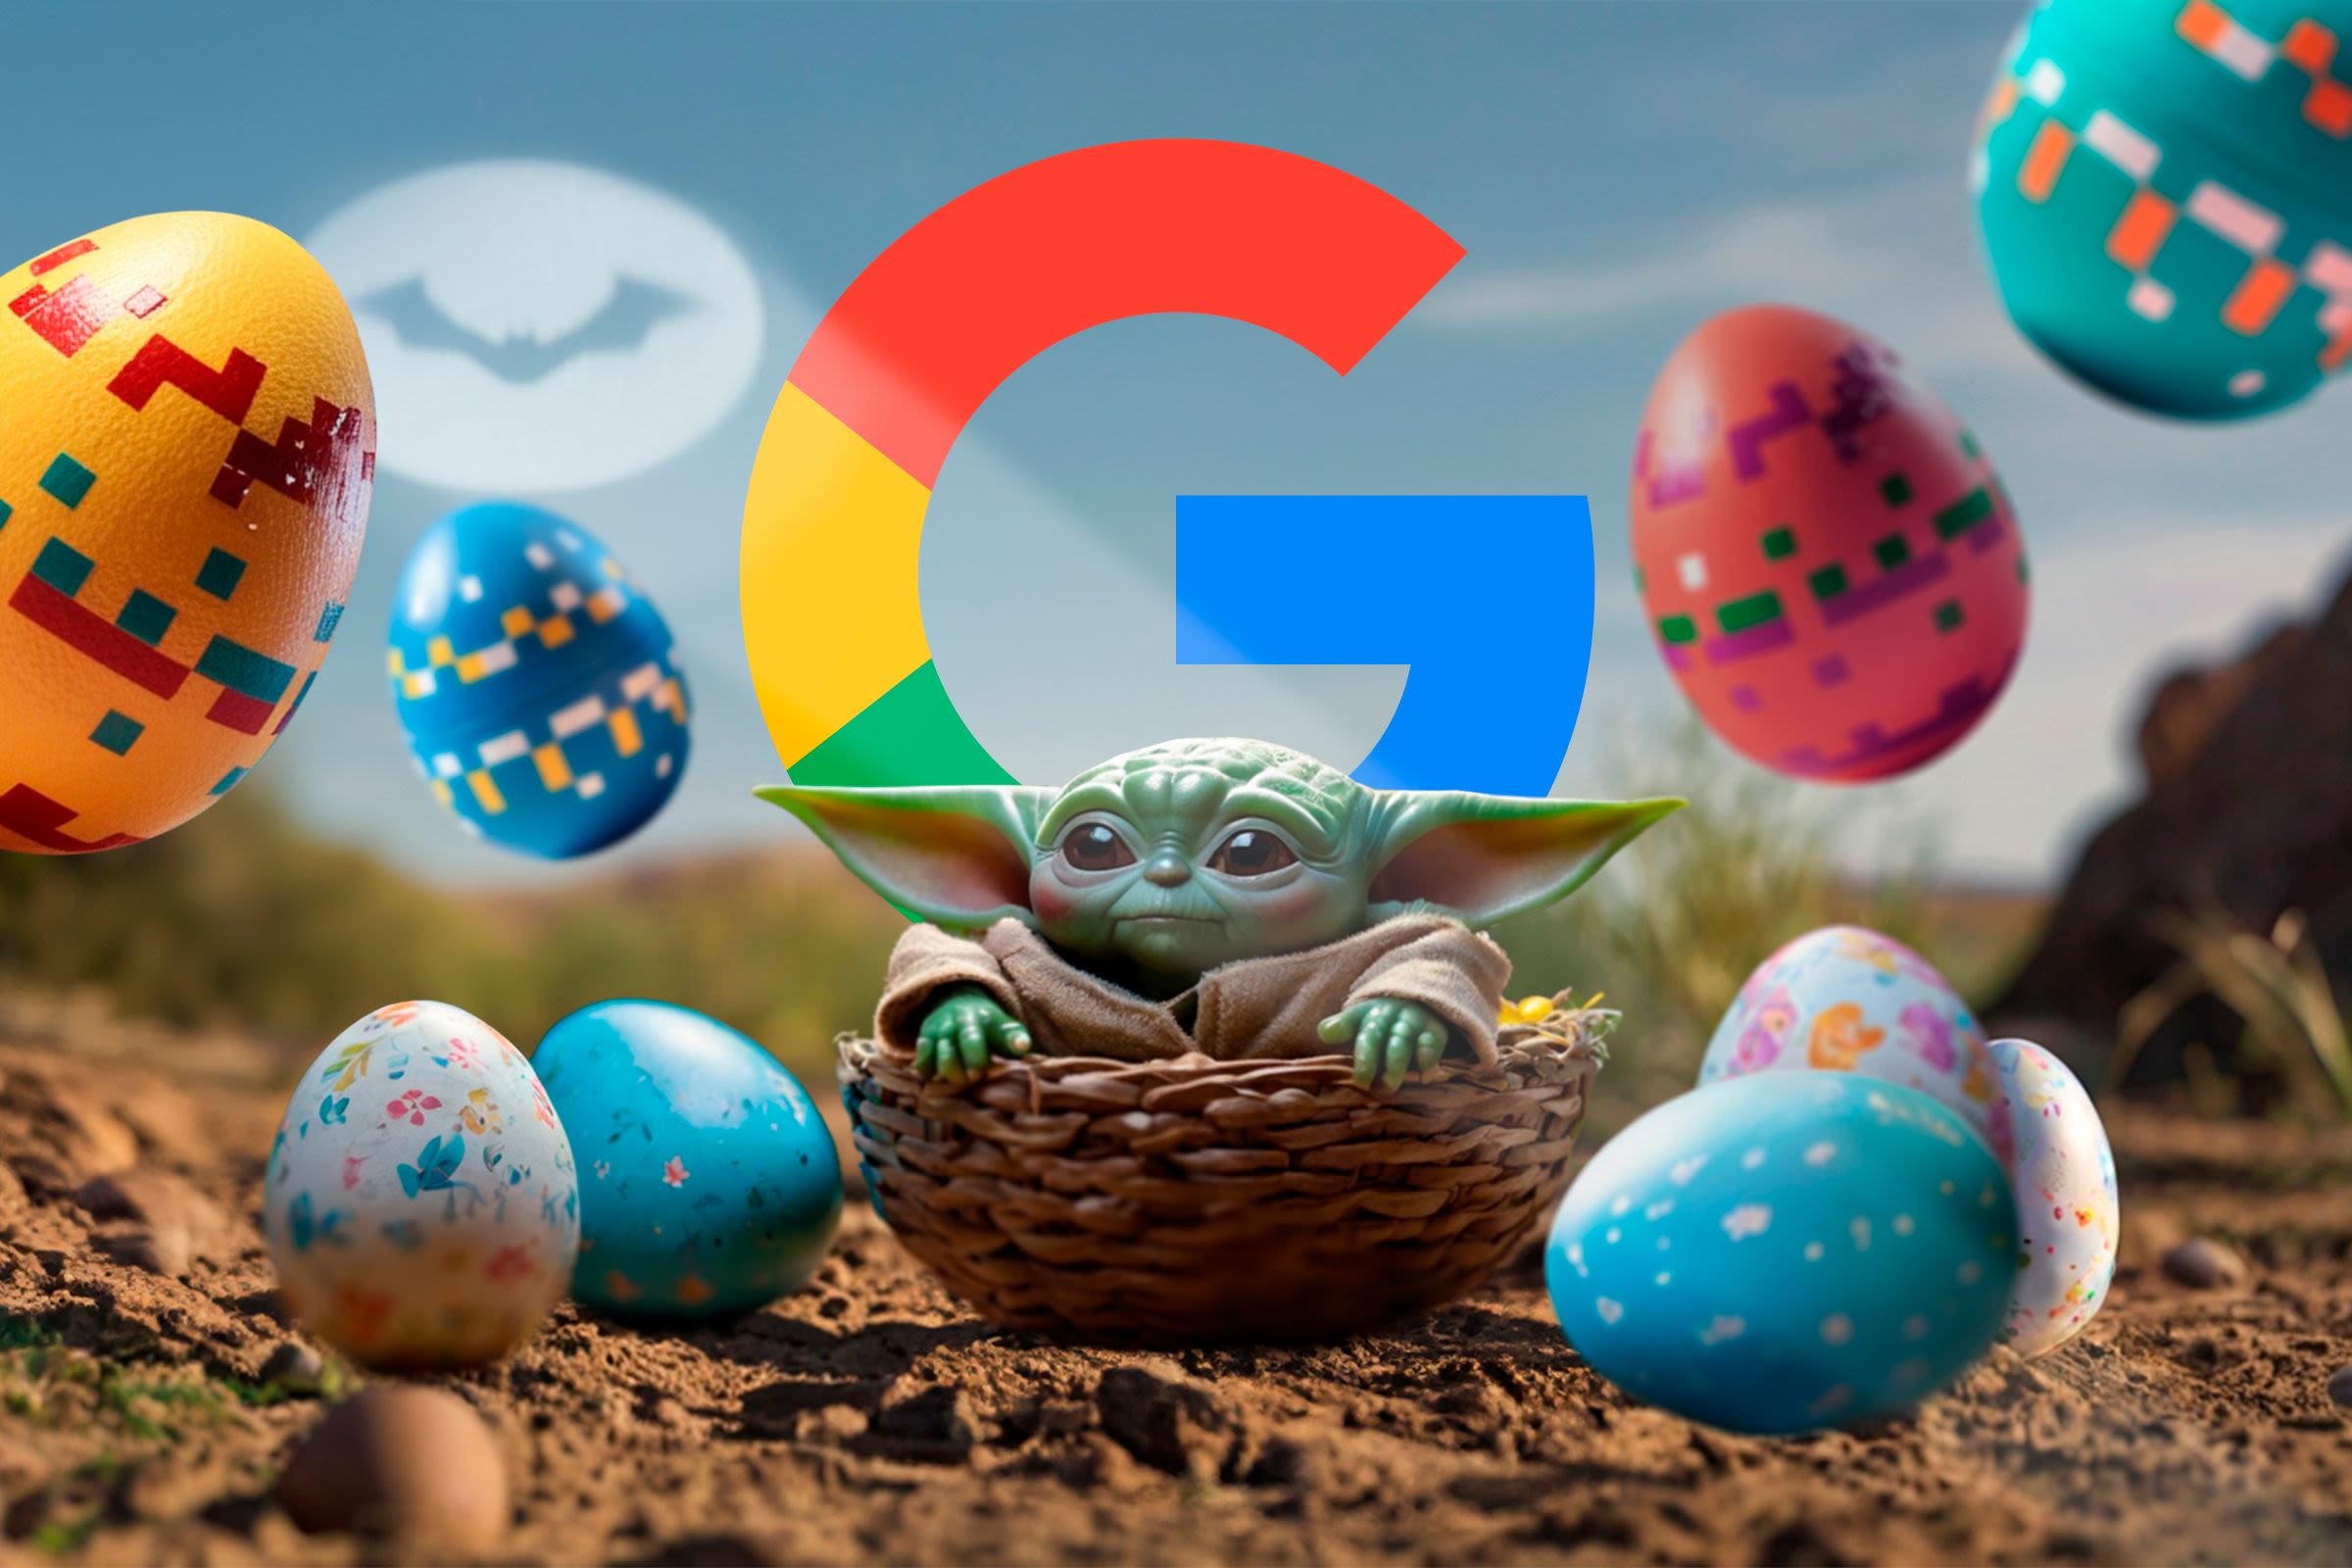 Check Out Google's Hidden Easter Eggs from Your Favorite Movies and TV Shows